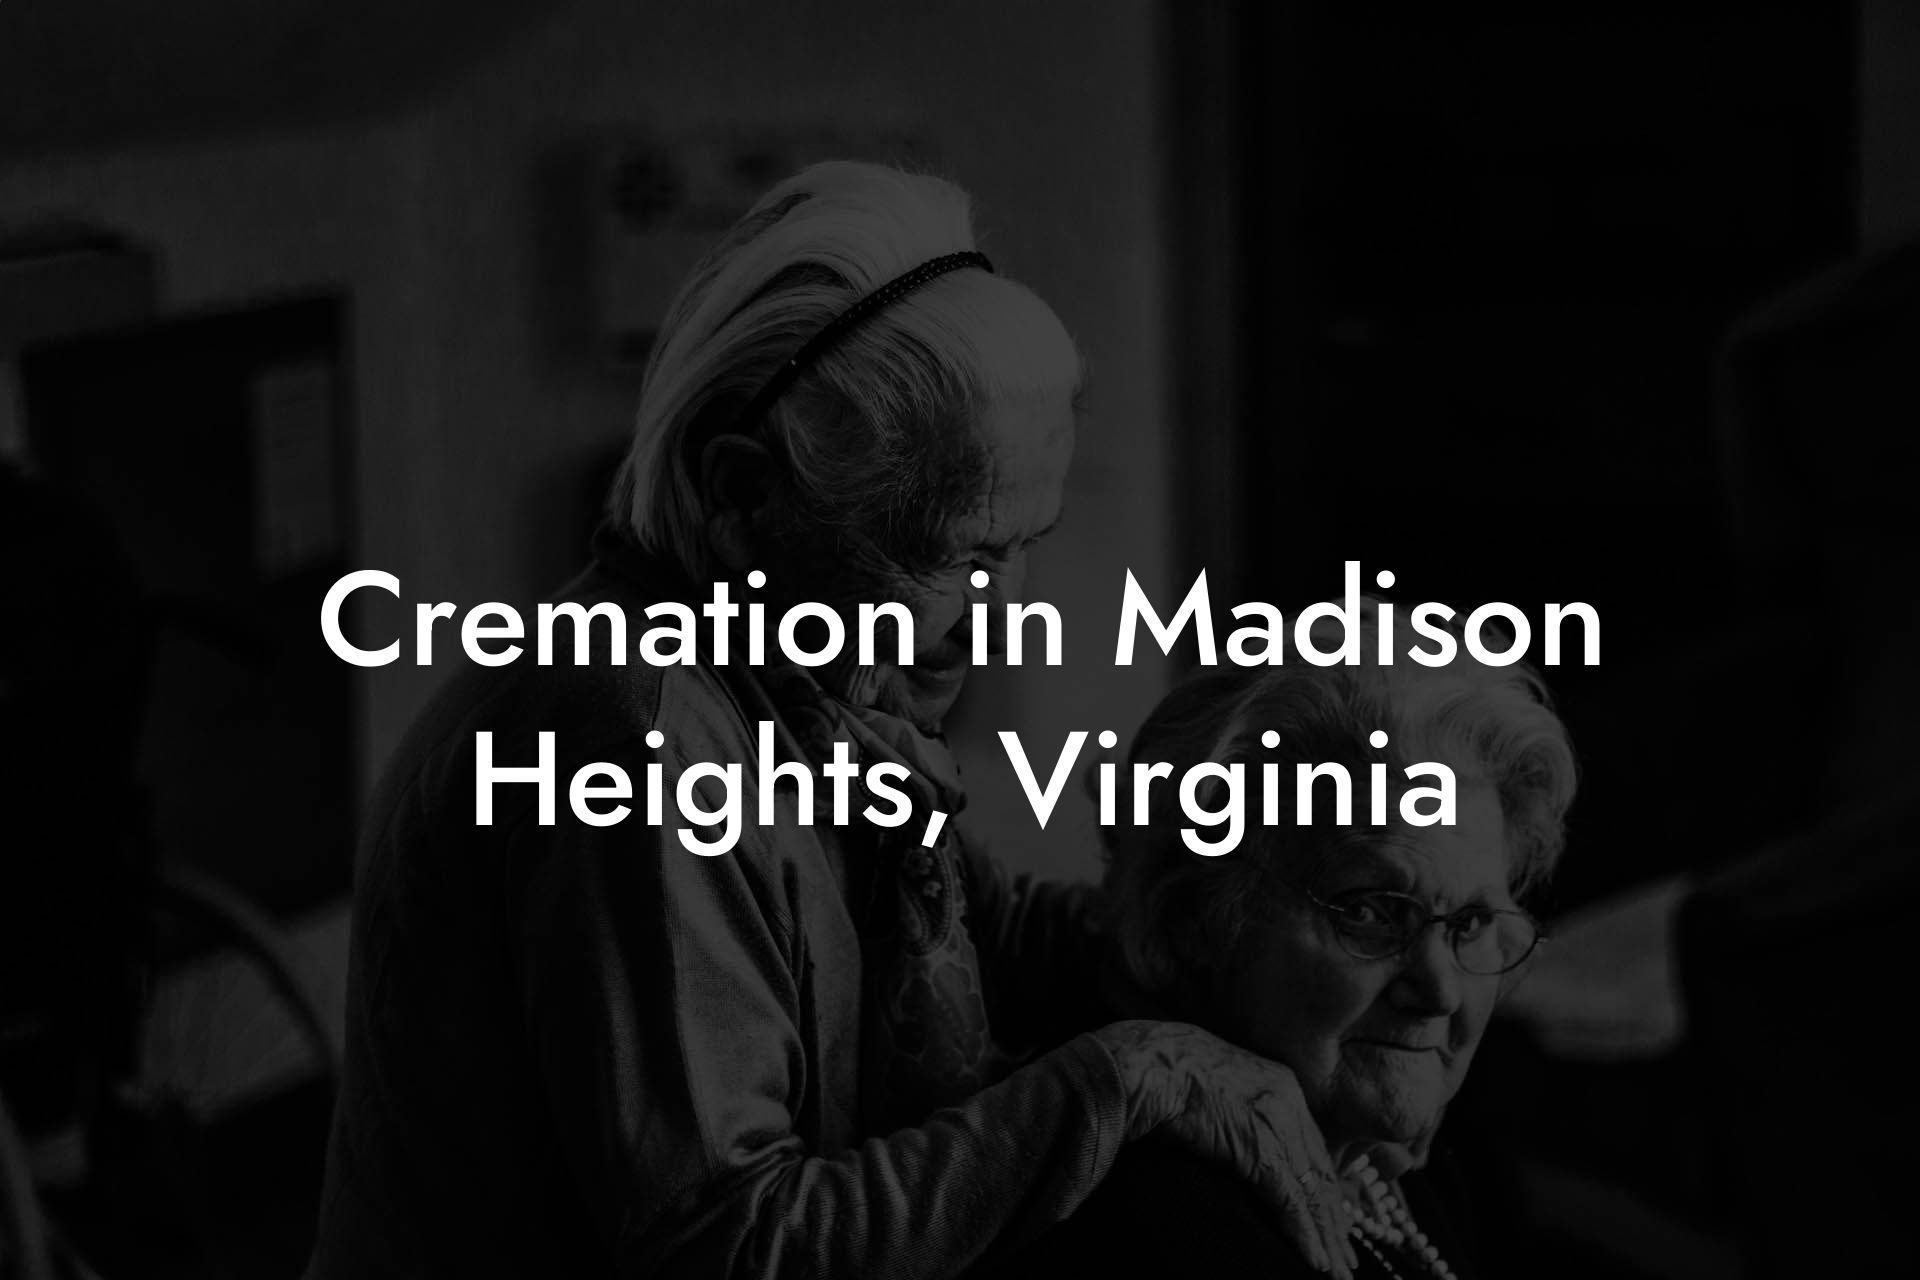 Cremation in Madison Heights, Virginia